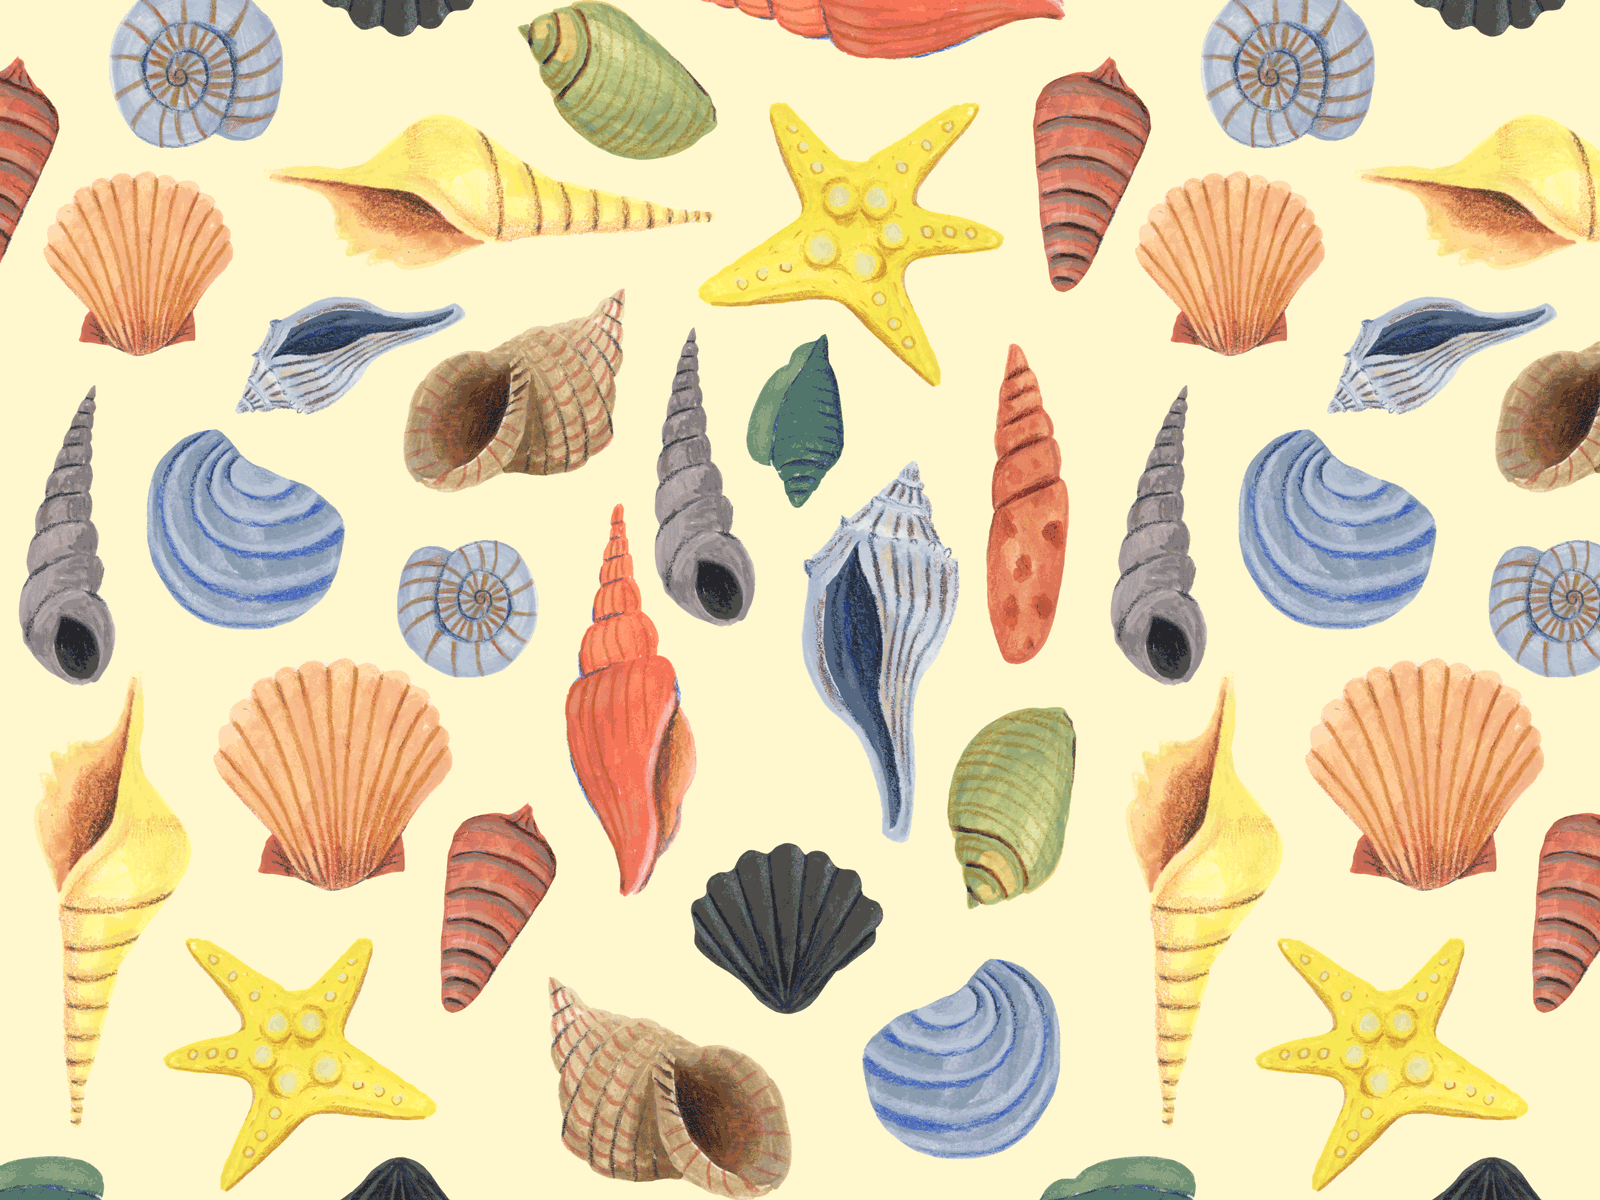 Sea Shell Pattern by Steph Brocious on Dribbble